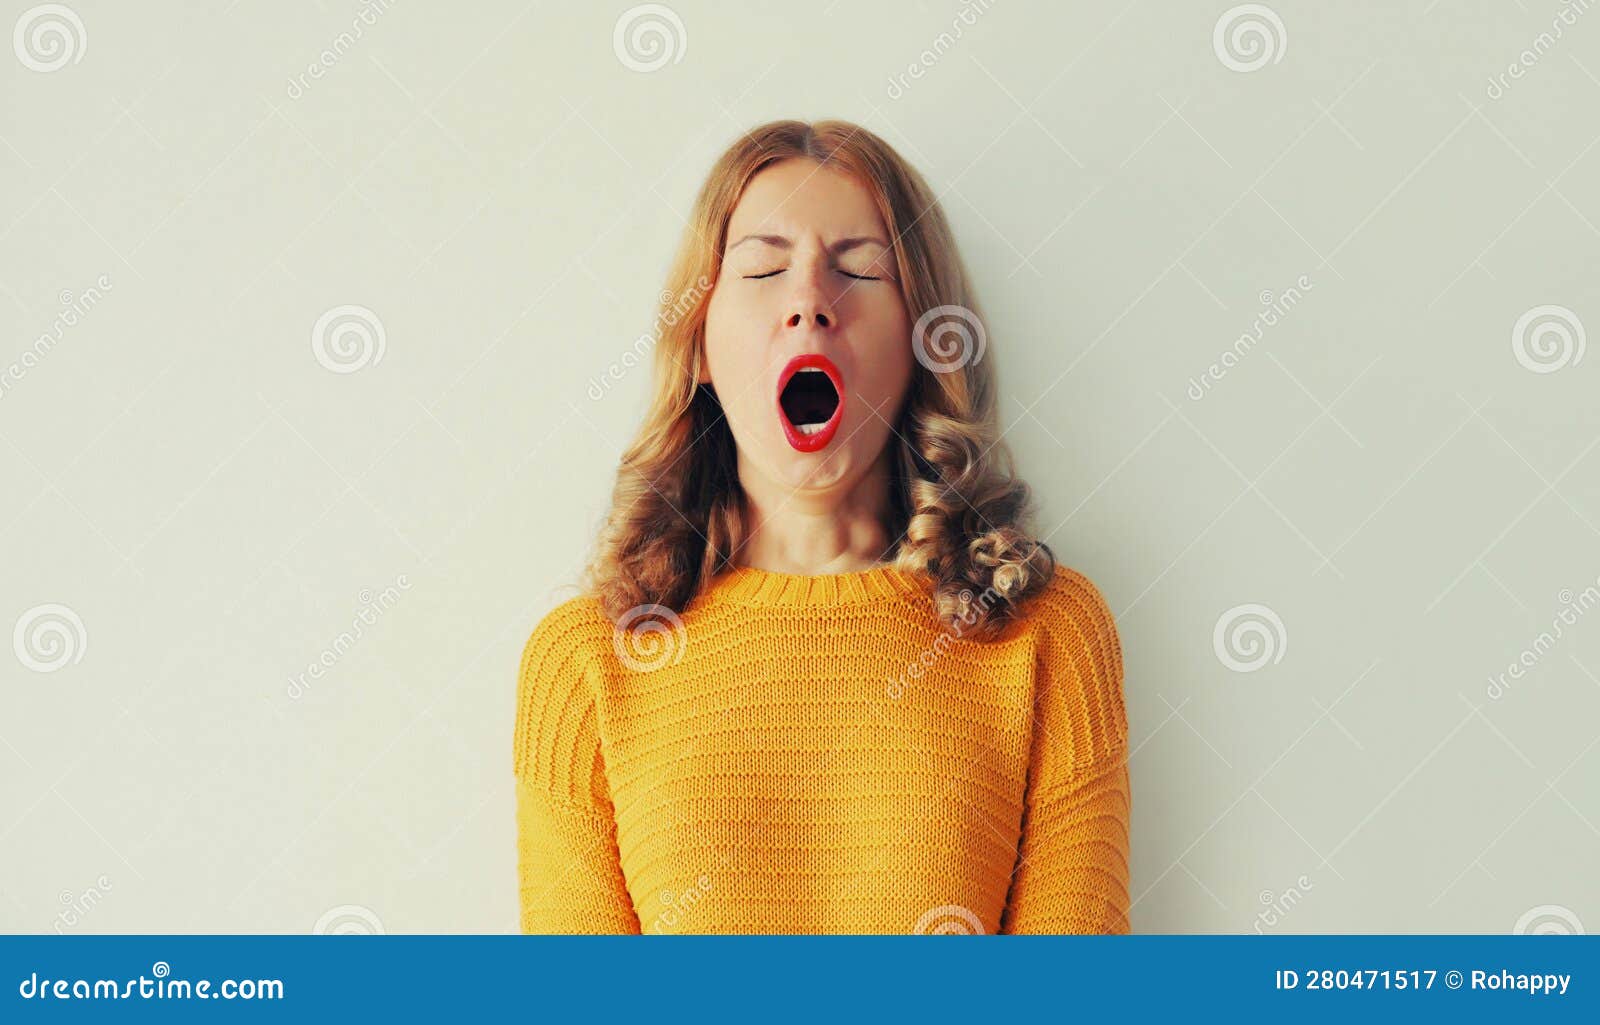 sleepiness. young tired woman yawns opens her mouth wide